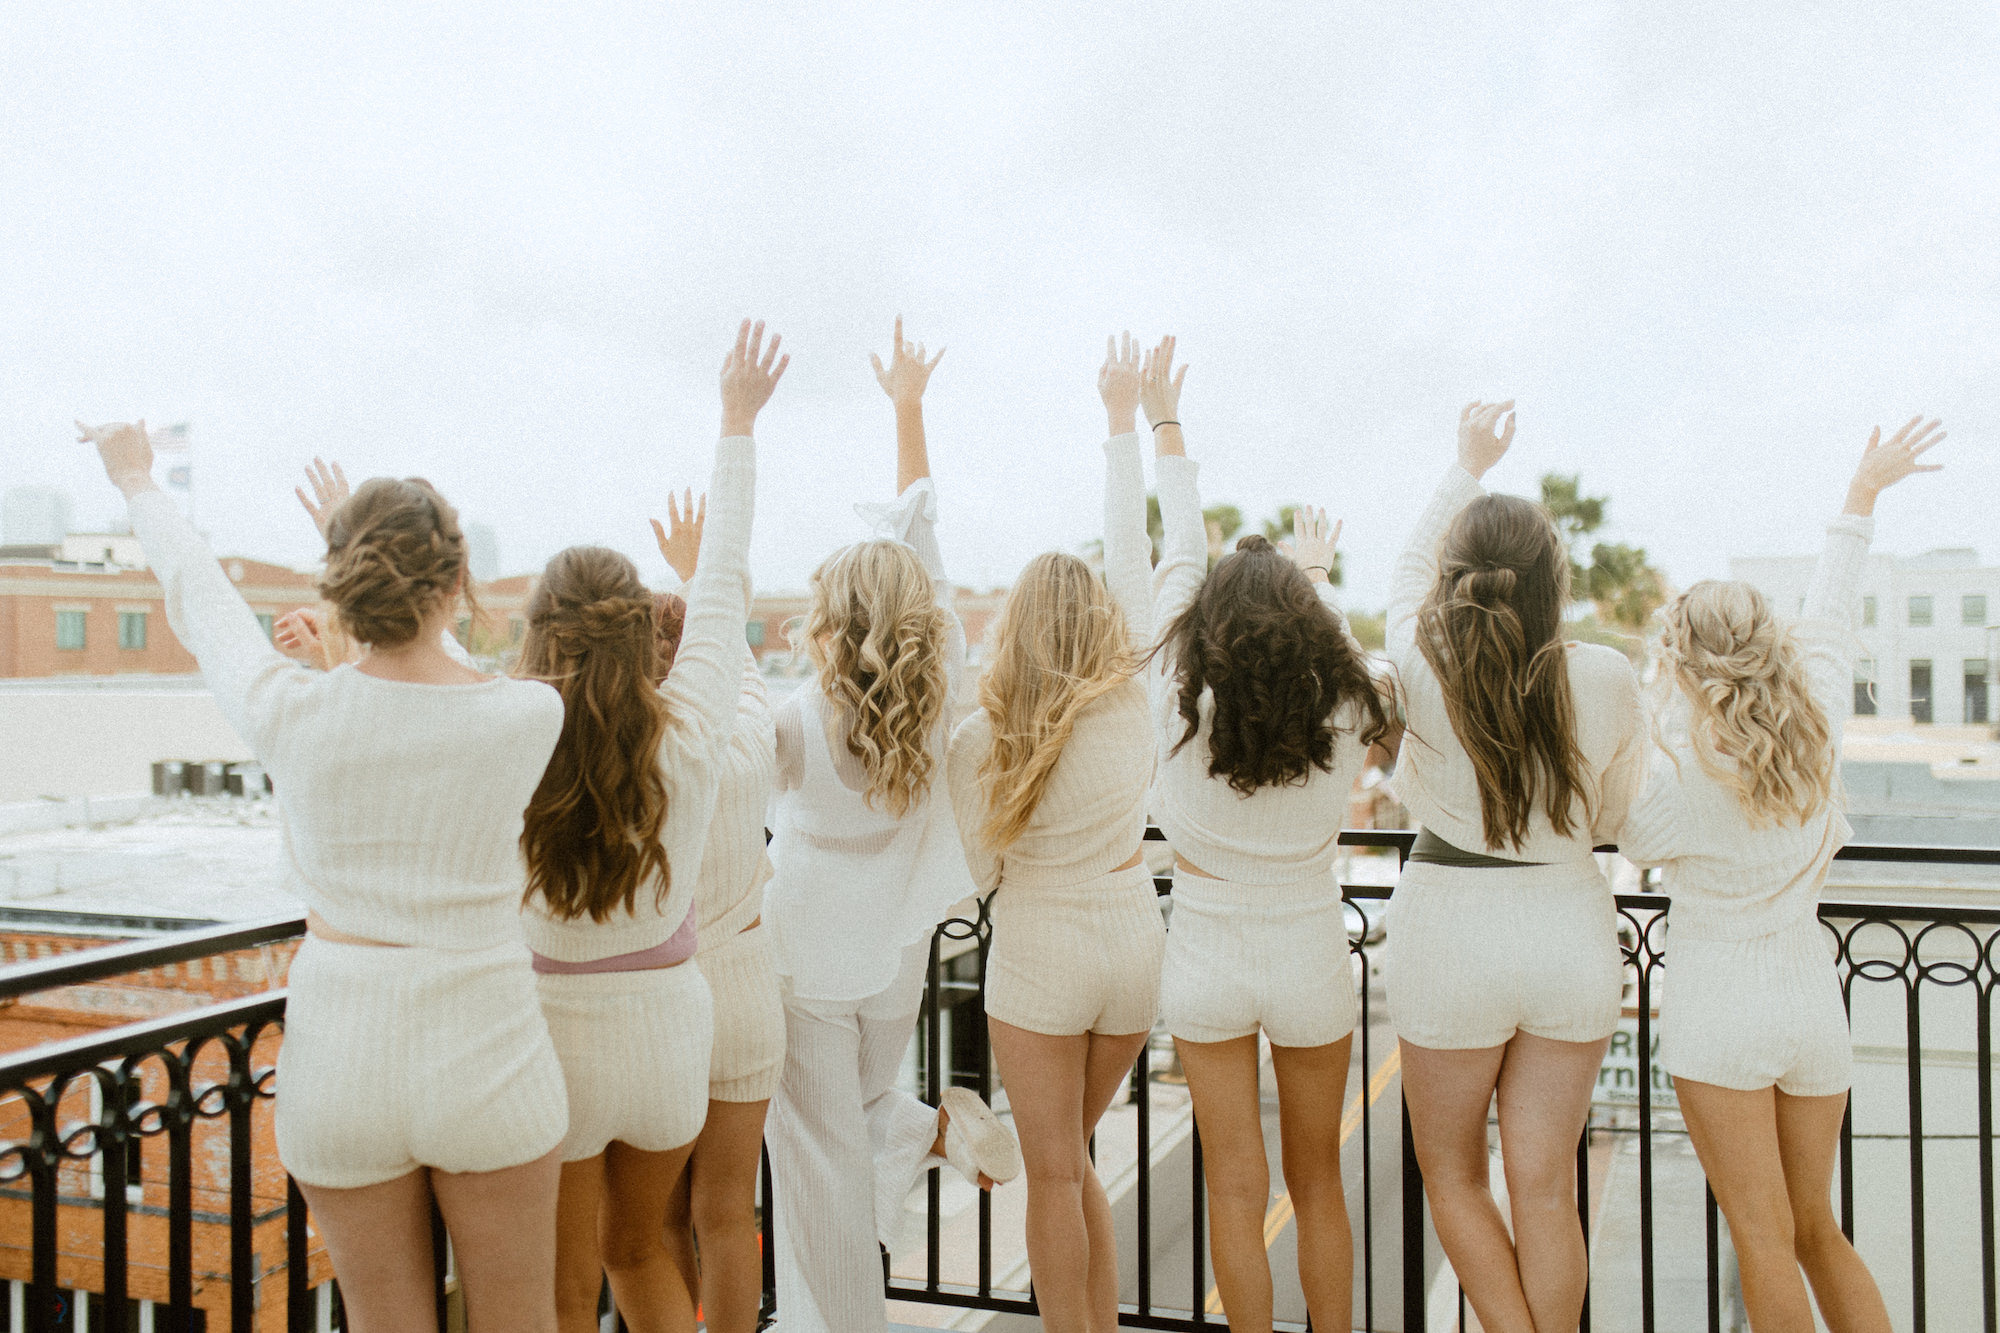 Bridesmaids Getting Ready in Matching White Pjs Inspiration Wedding Portrait